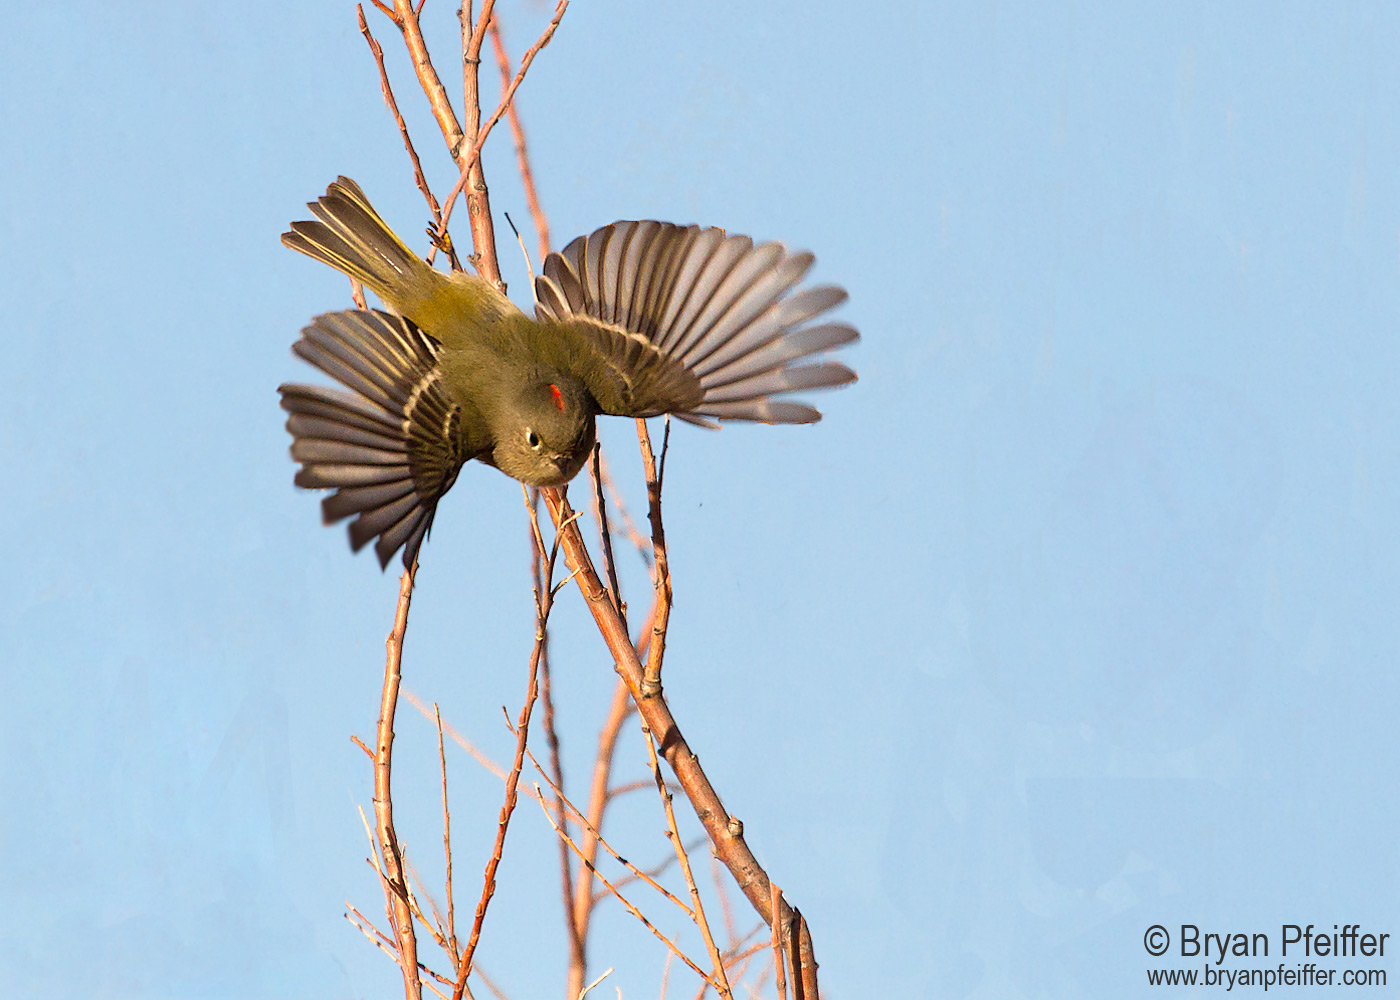 A Ruby-crowned Kinglet, festive for the season, takes flight in central New Mexico earlier this month. / © Bryan Pfeiffer